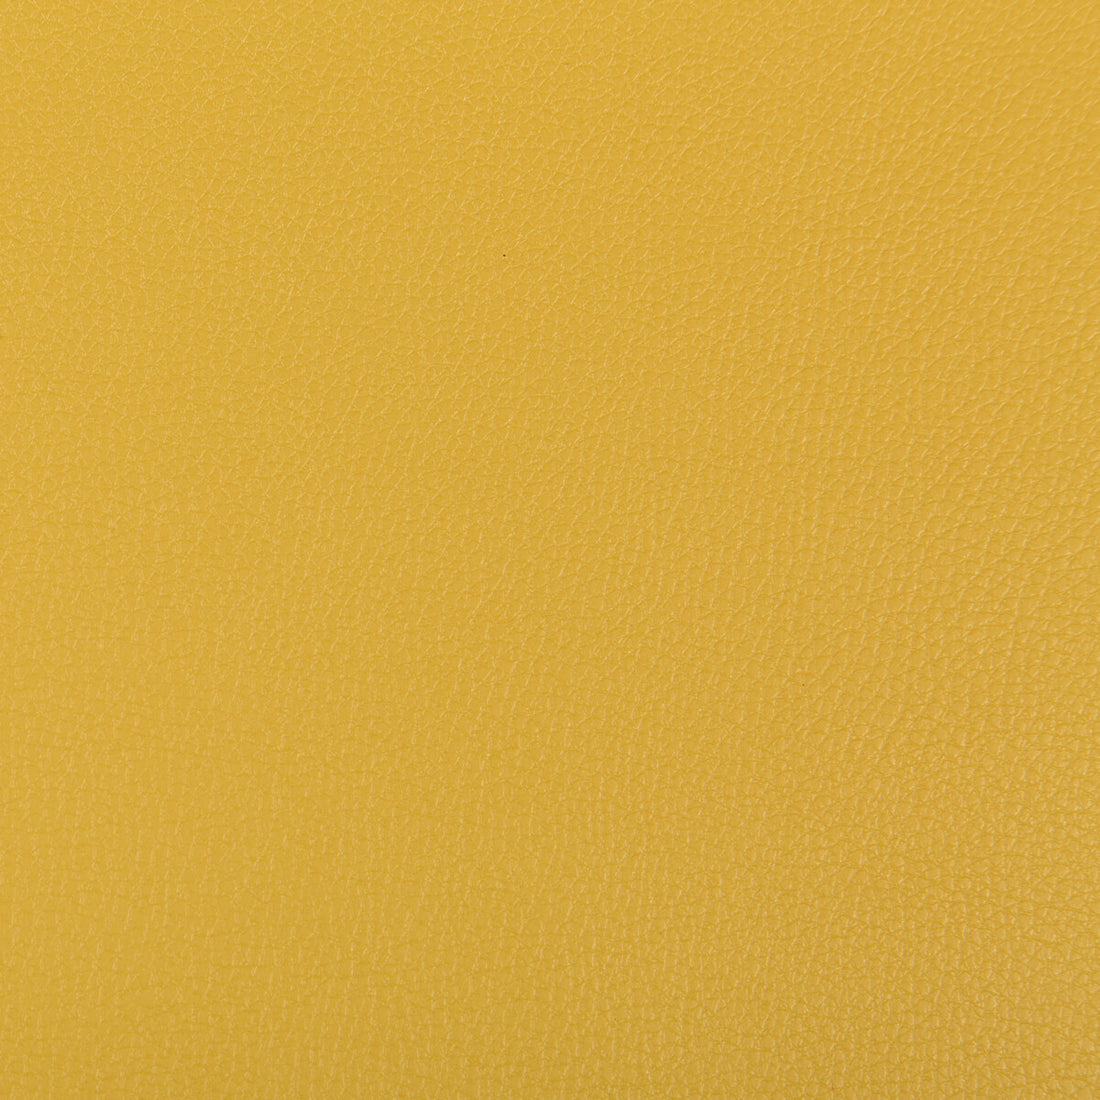 Syrus fabric in mustard color - pattern SYRUS.440.0 - by Kravet Contract